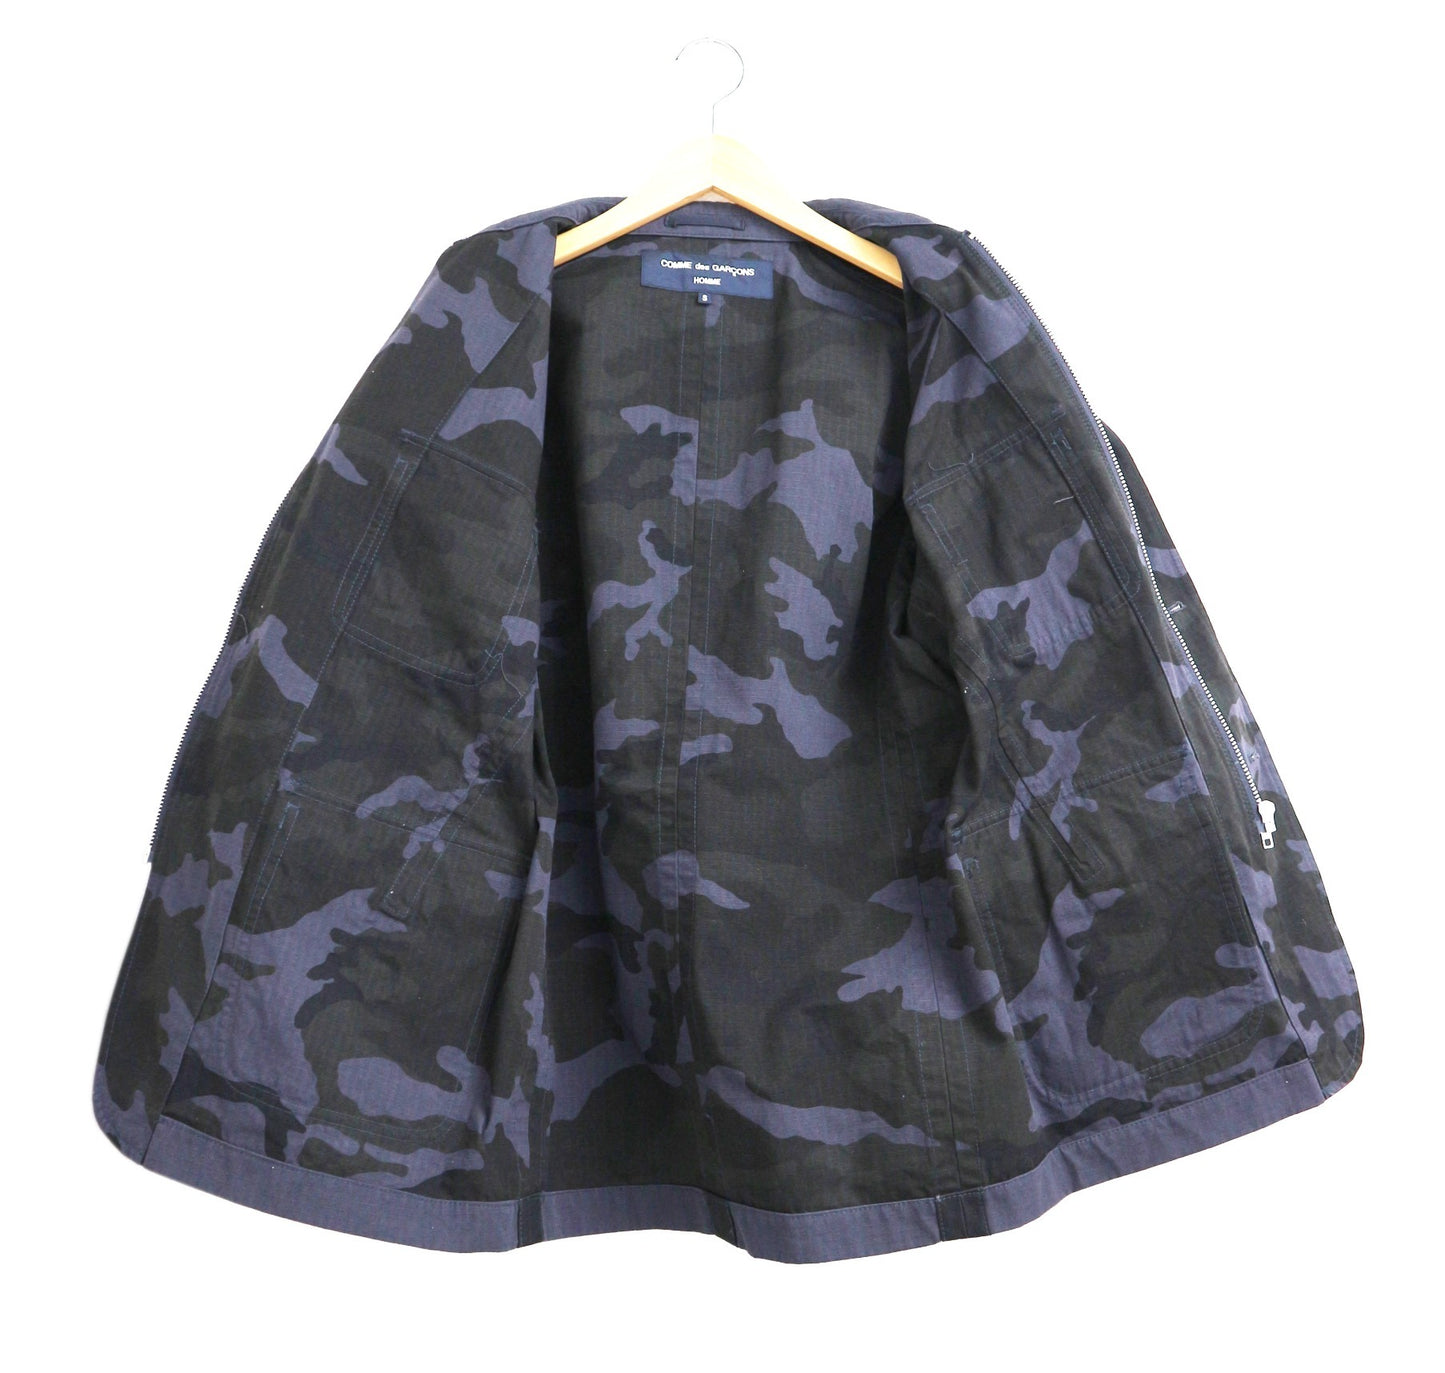 Comme des Garcons Homme Ripstop 위장 패턴 재킷 He-J018